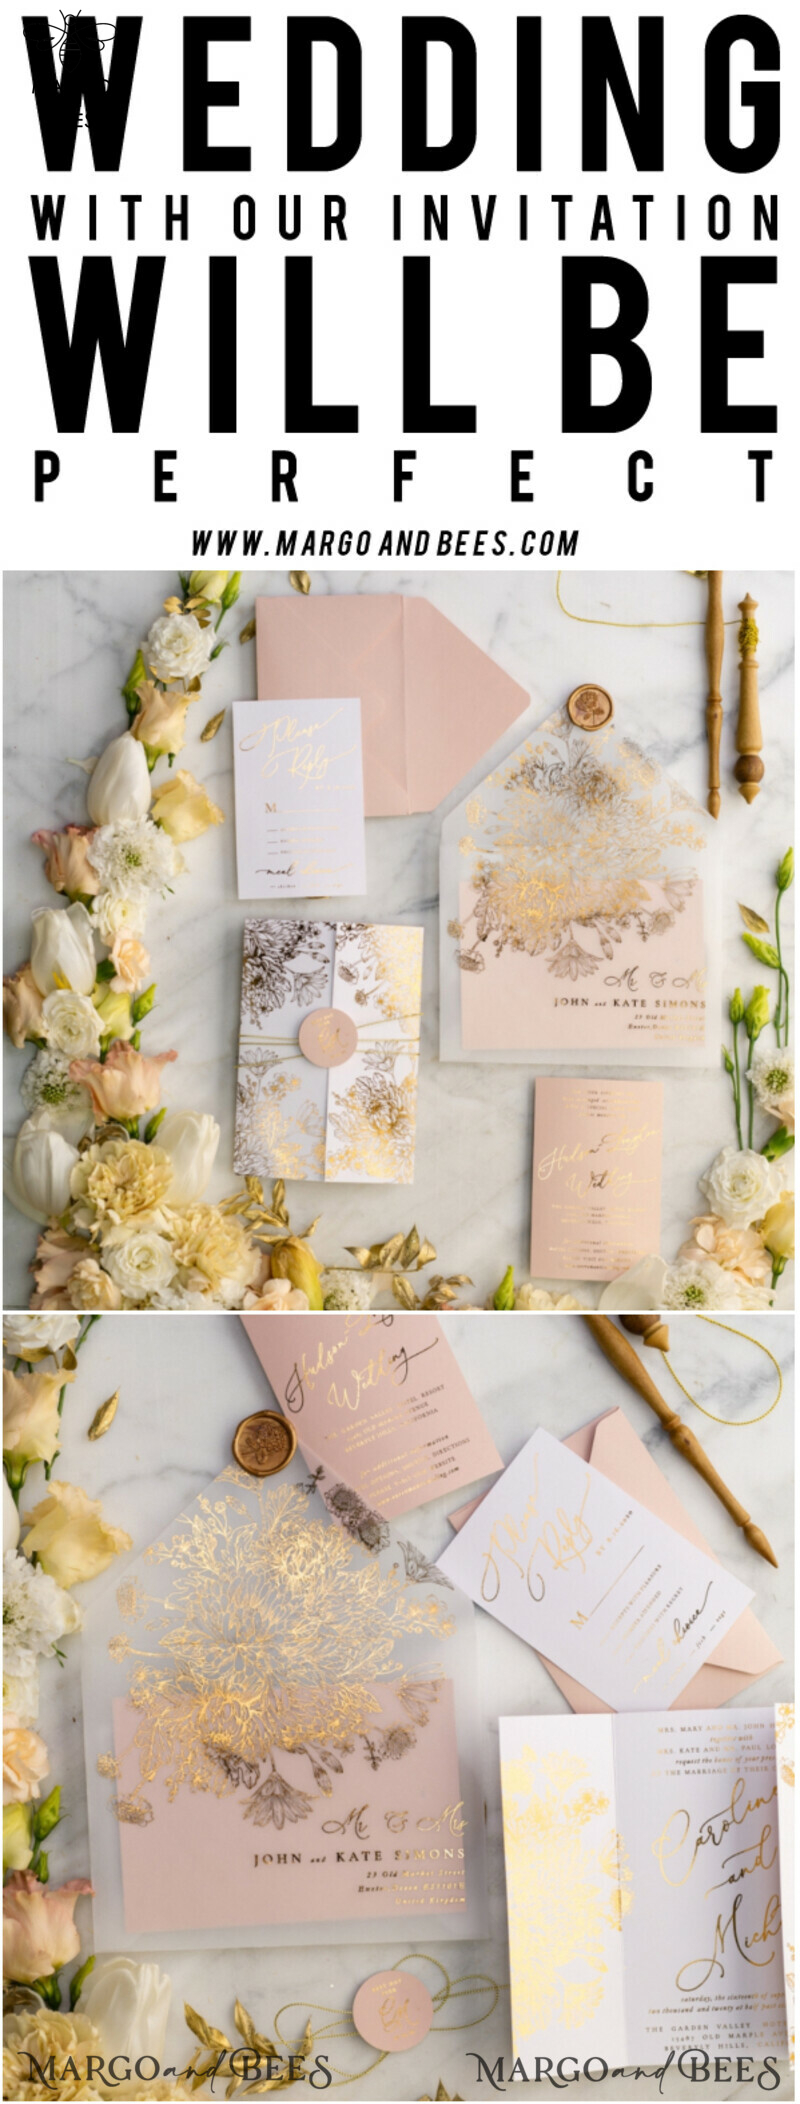 Exquisite Arabic Golden Wedding Invitations with Glamour Gold Foil for a Romantic Blush Pink Affair: Bespoke Indian Wedding Stationery-37